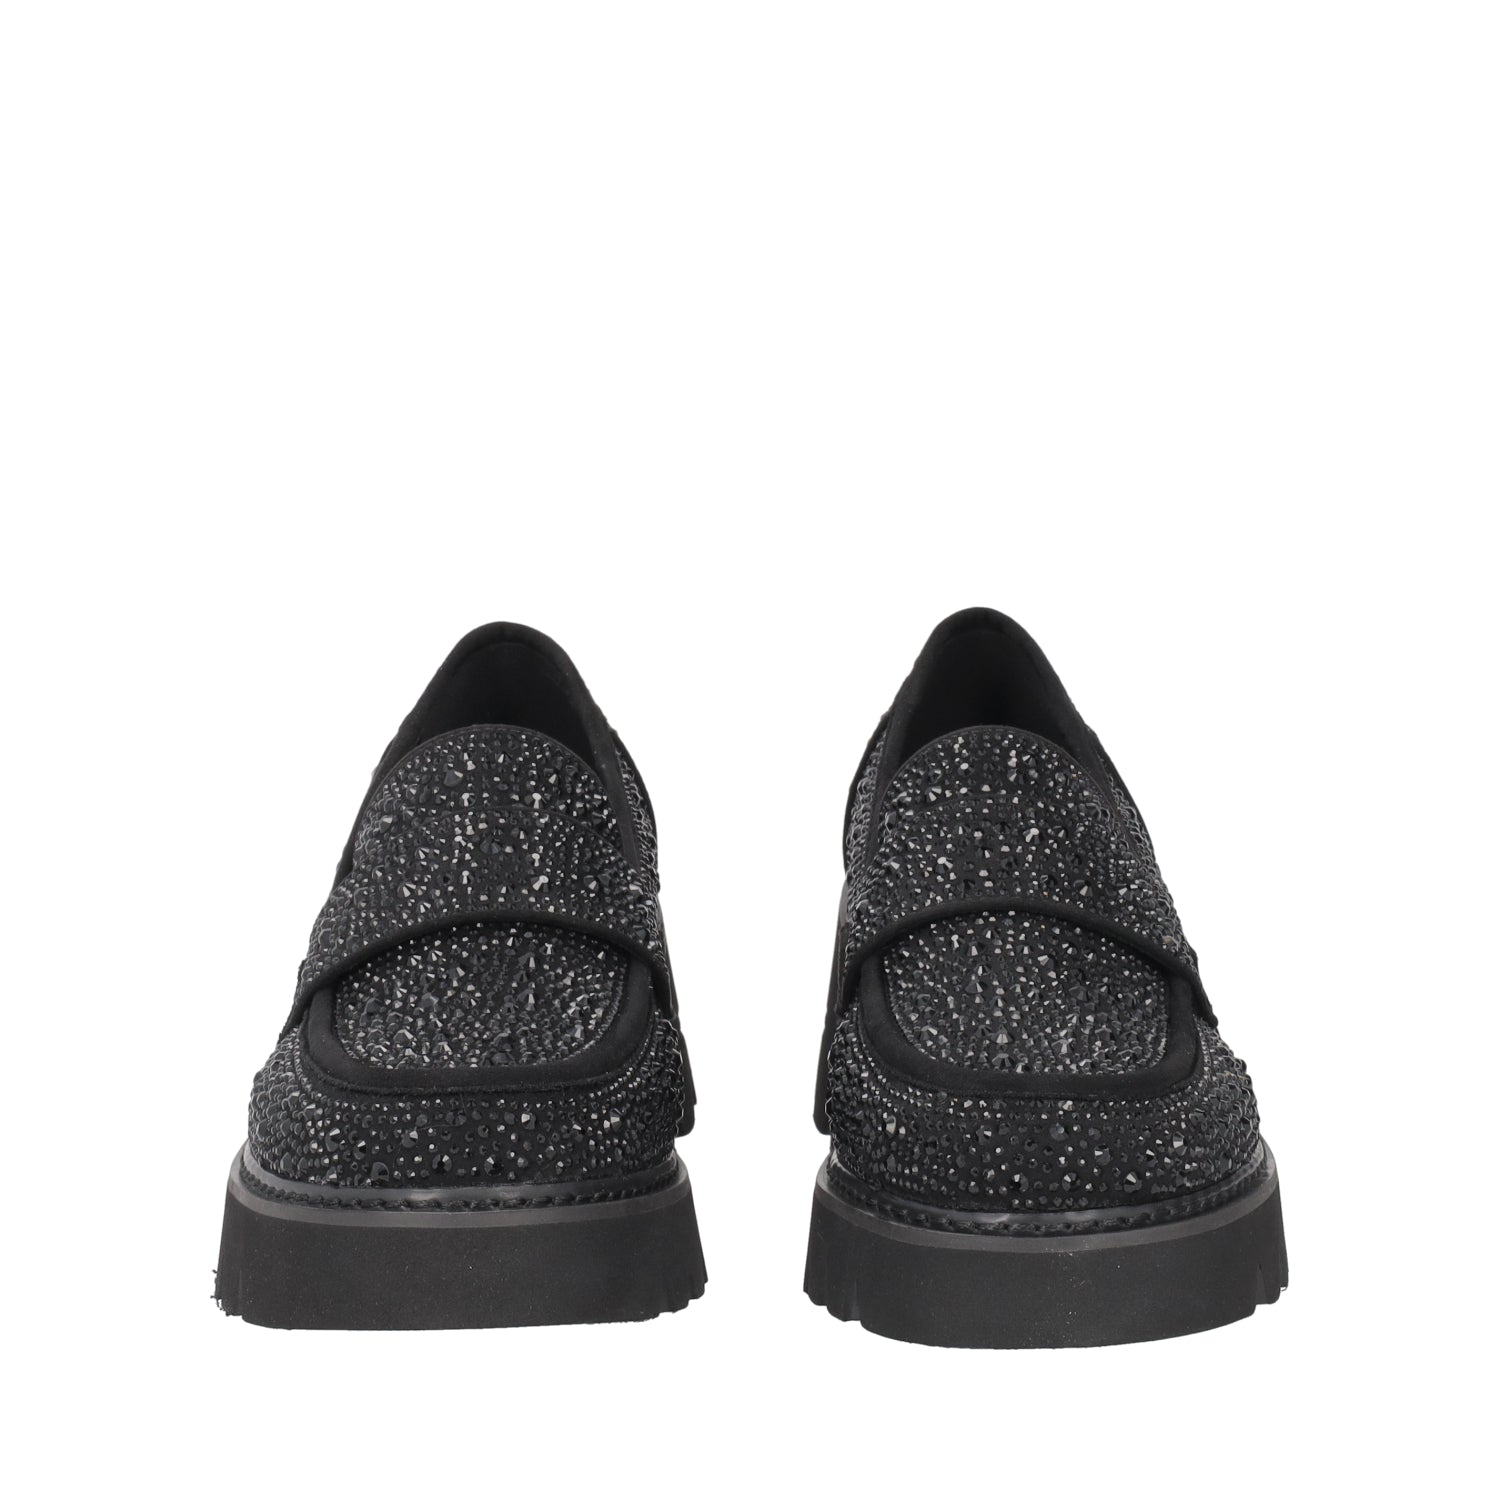 BLACK “JUNGLE” LOAFERS WITH ALL-OVER DIAMANTÉ DETAILING